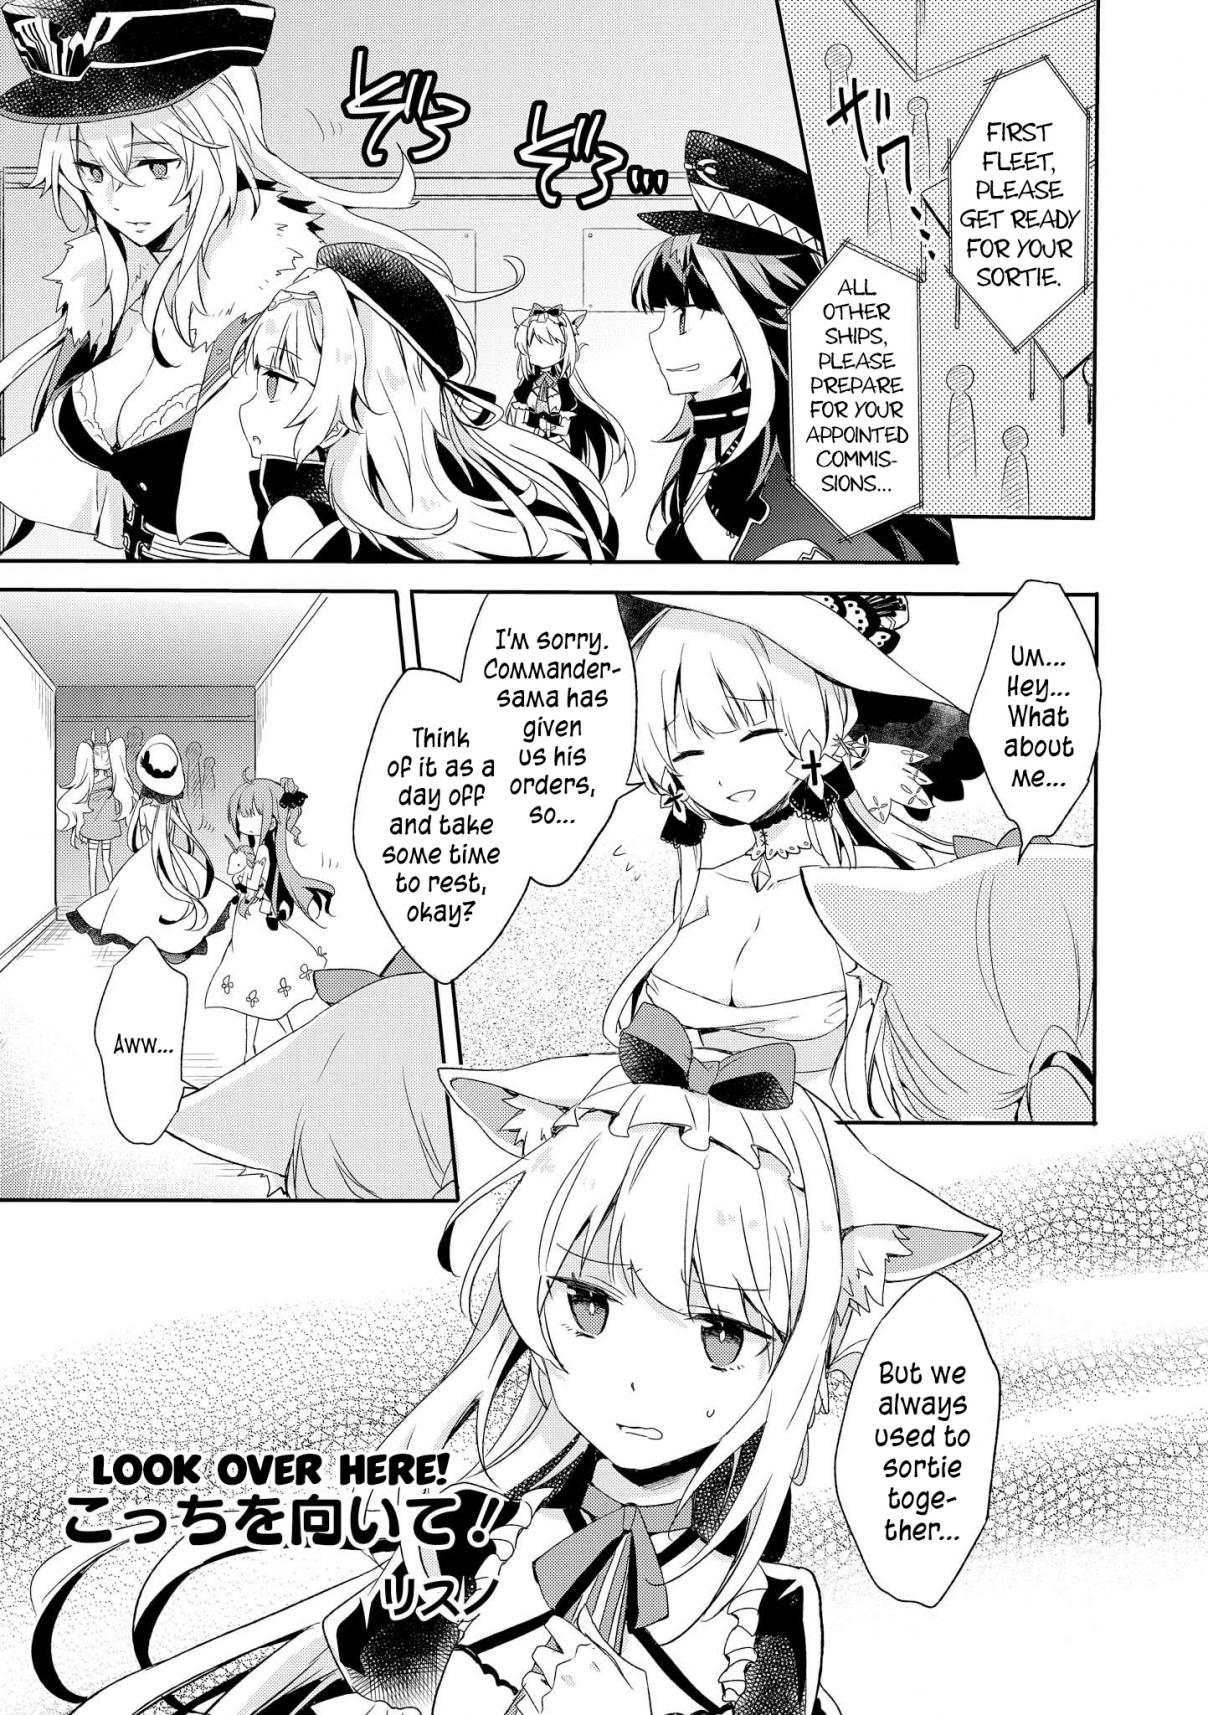 Azur Lane Comic Anthology Vol. 1 Ch. 8 Look Over Here!